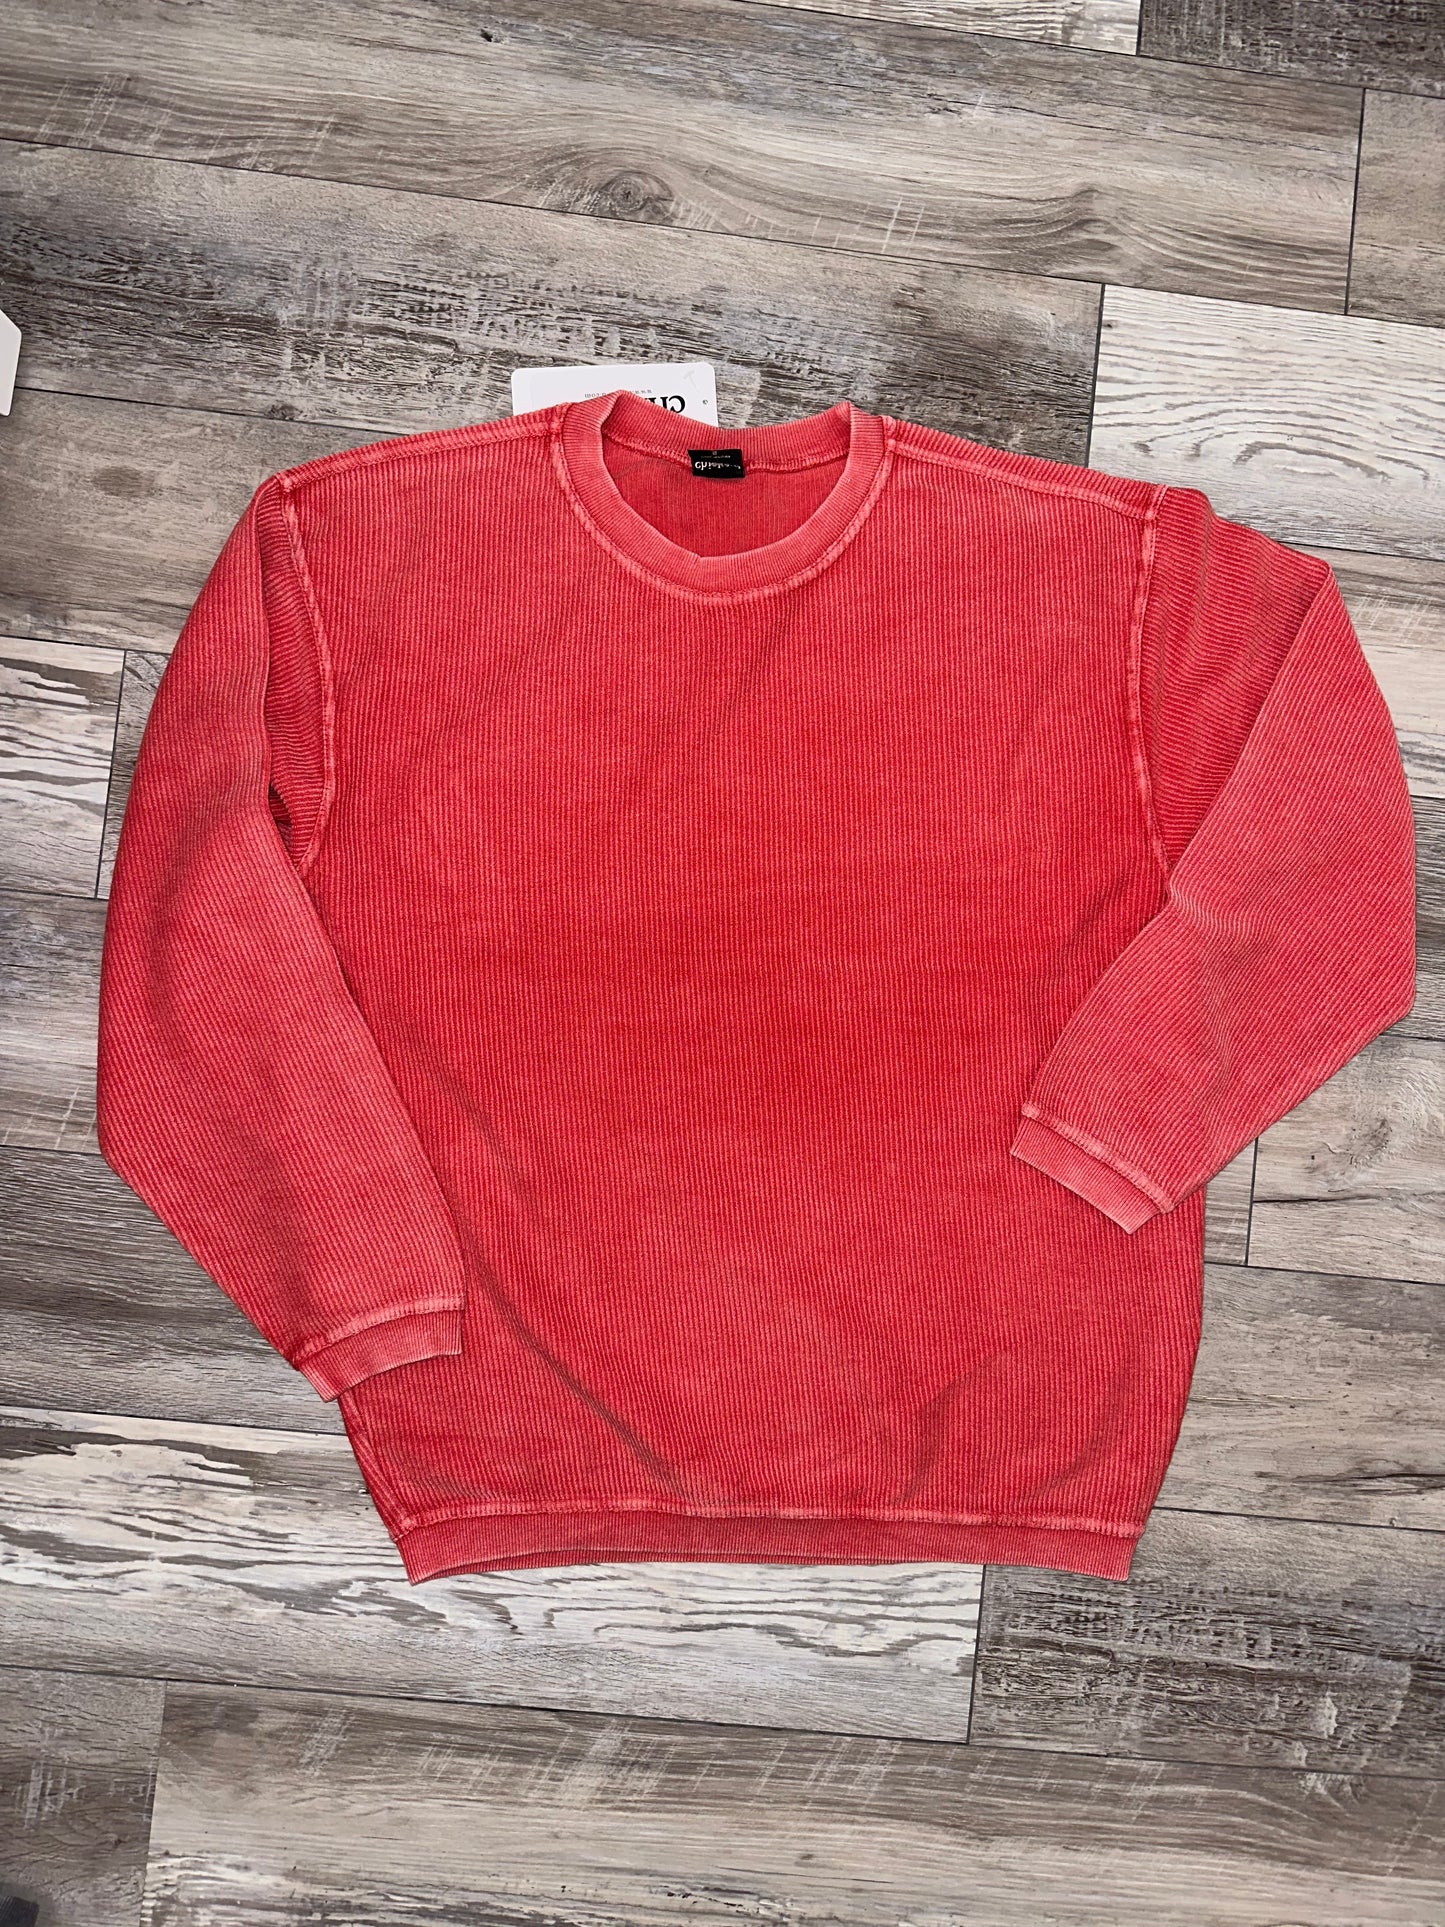 Best Seller! Custom corded sweatshirts are here! Multiple Colors Avail